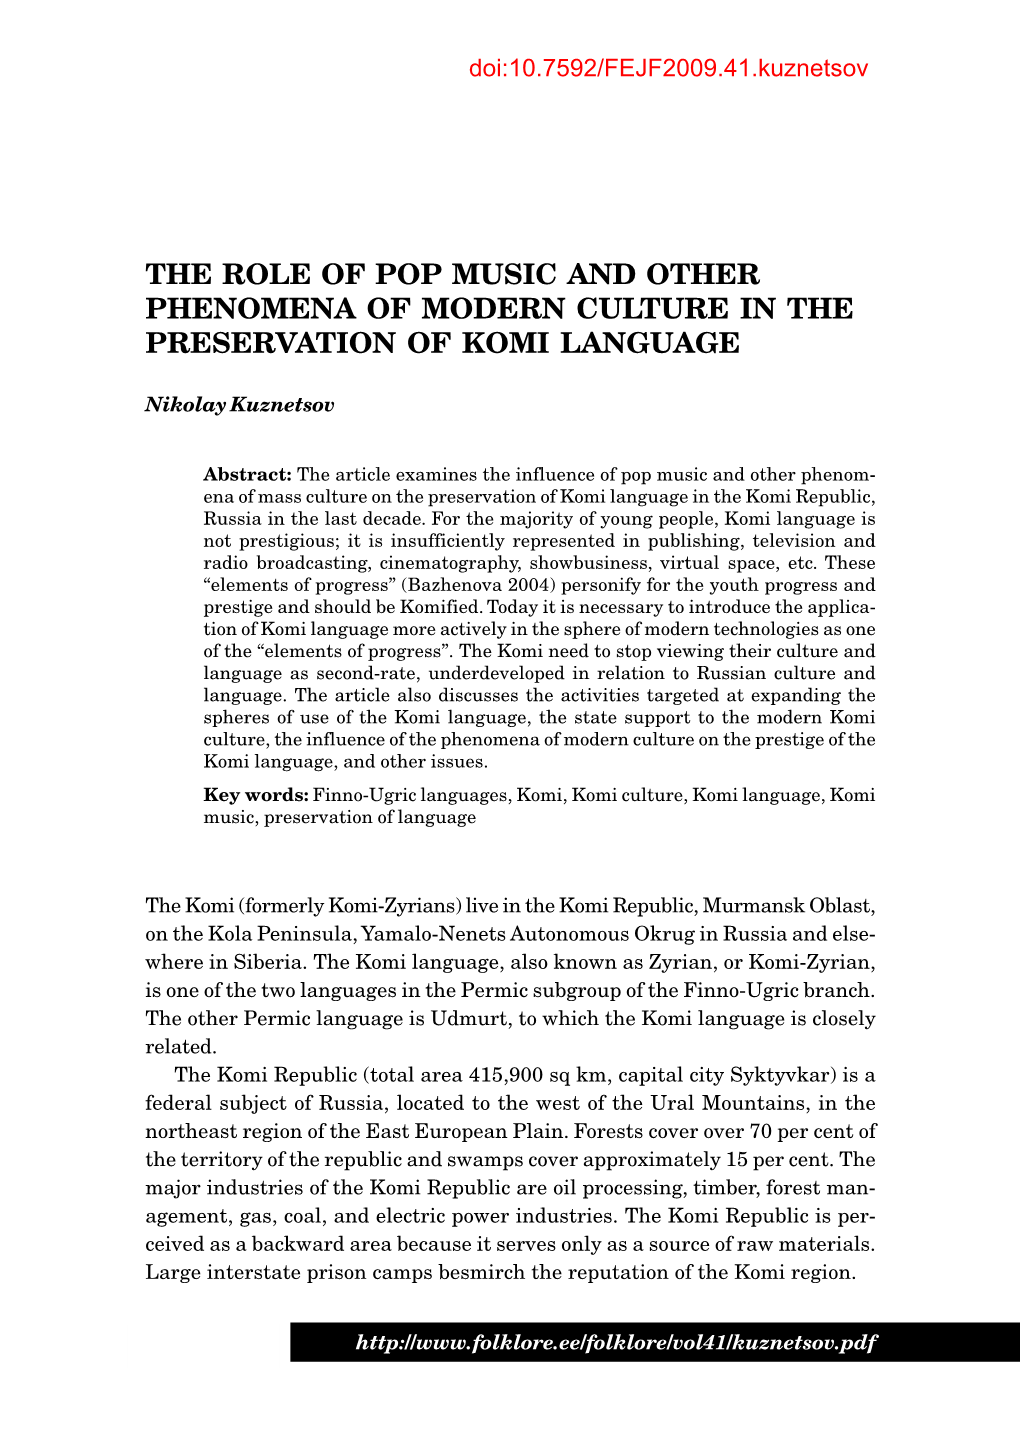 The Role of Pop Music and Other Phenomena of Modern Culture in the Preservation of Komi Language